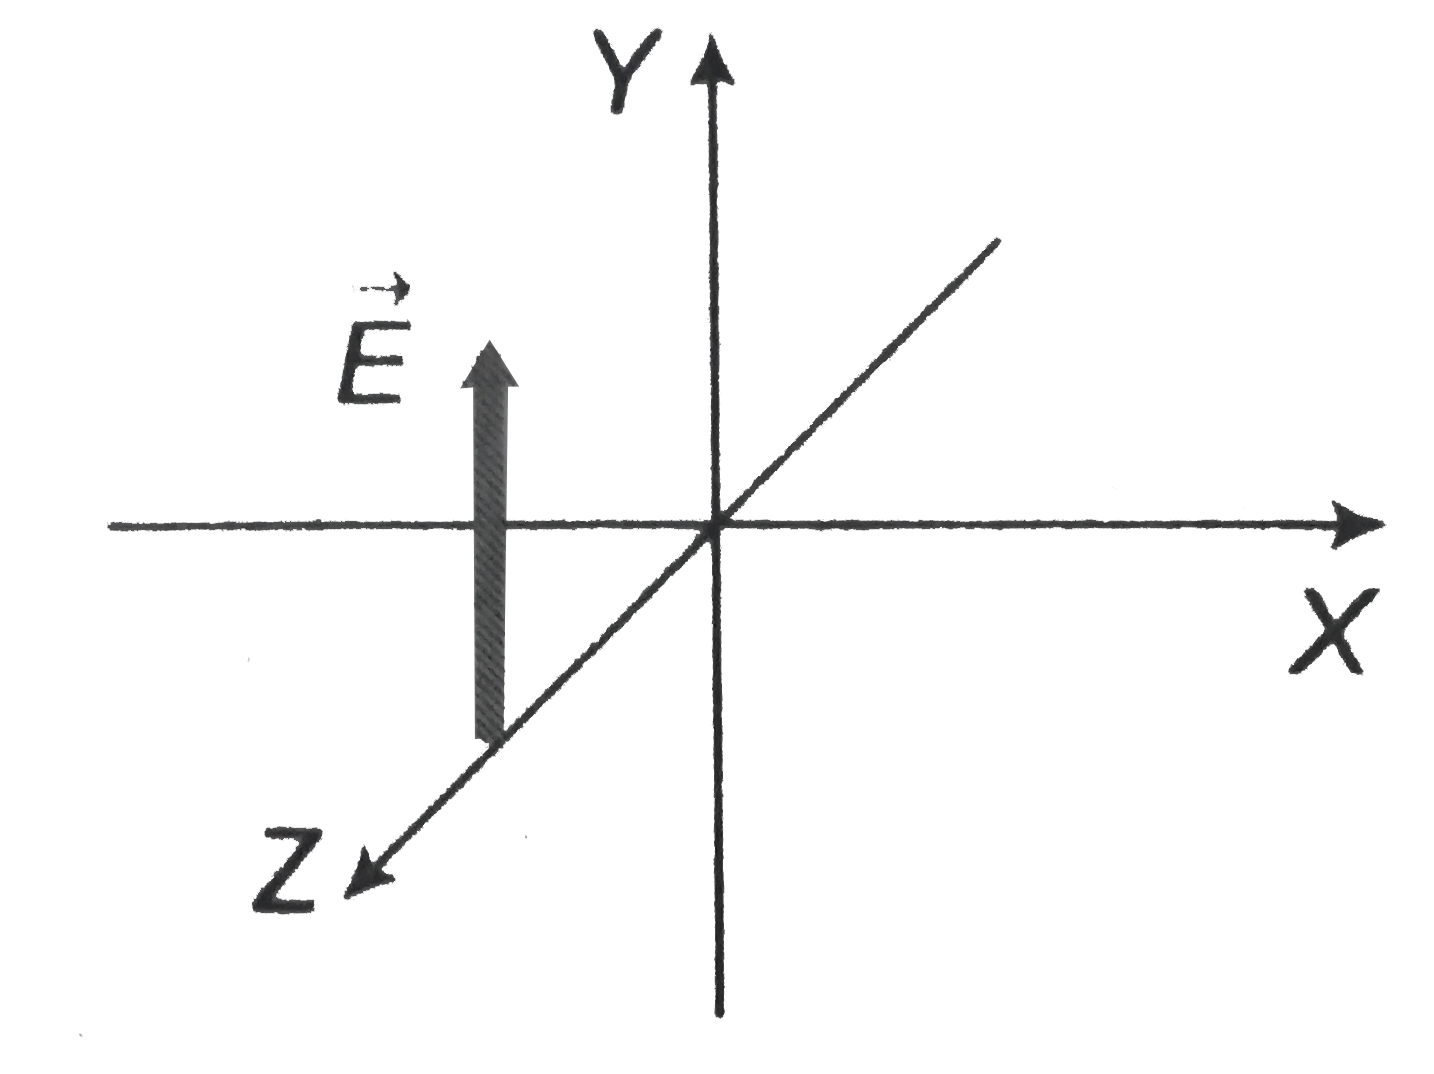 The figure here gives the electric field of an EM wave at a certain point and a certain. The wave is transporting energy in the negative z direction. What is the direction of the magnetic field of the wave at the point and instant?     A. Towards + X direction  B. Towards - X direction C. Towards + direction D. Towards - Z direction